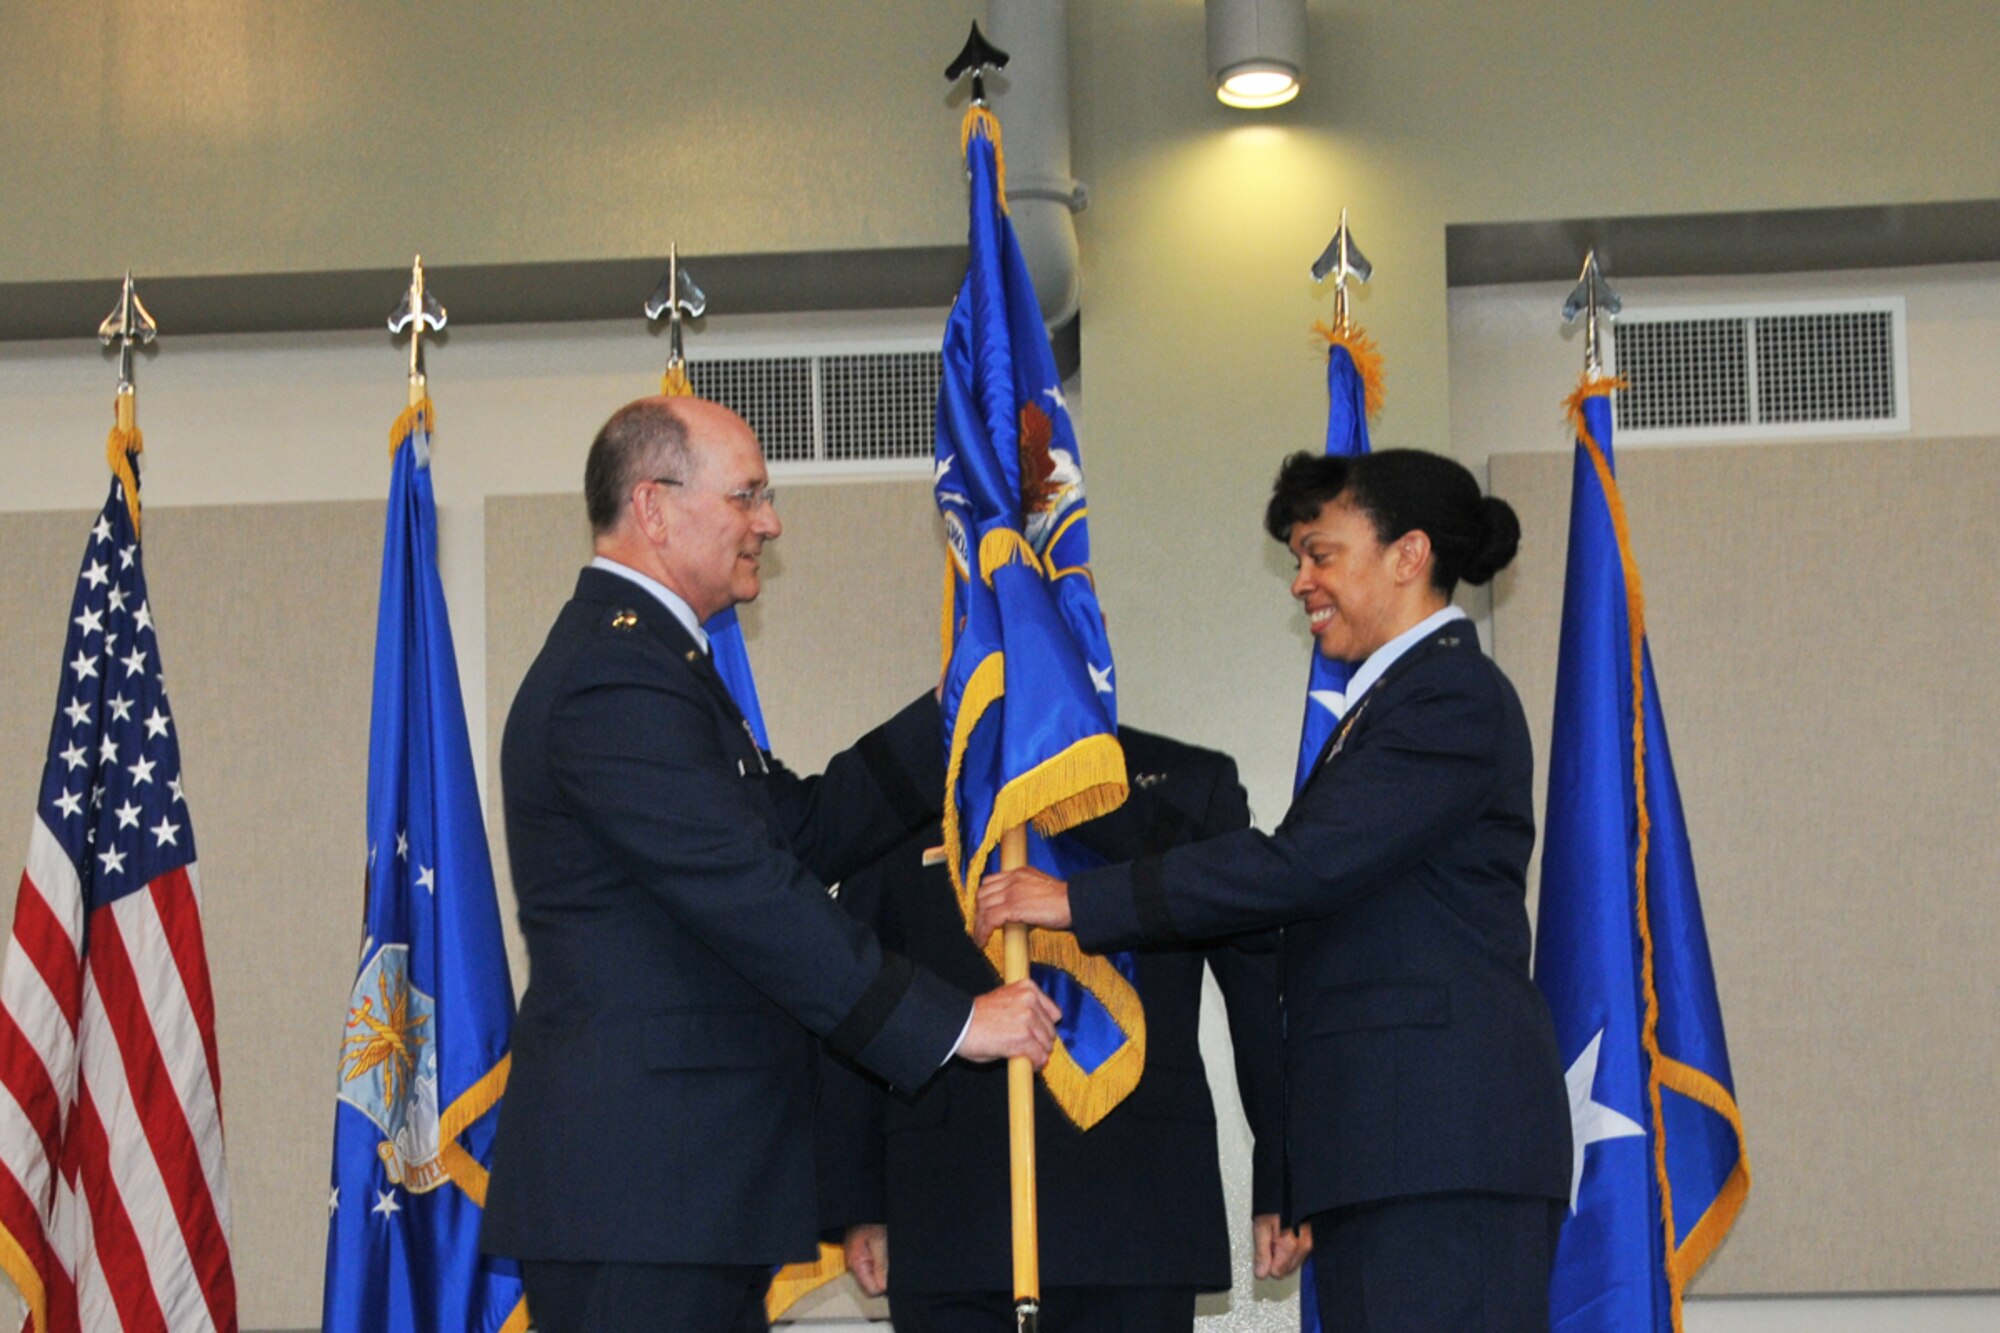 Lt. Gen. James “JJ” Jackson,  chief of Air Force Reserve, Headquarters U.S. Air Force, Washington, D.C., and commander, Air Force Reserve Command, passes the 22nd Air Force Flag to Maj. Gen. Stayce D. Harris, during an assumption of command ceremony Aug. 9, 2014 at Dobbins Air Reserve Base, Ga. Harris will oversee 15,000 Reservists and 105 unit-equipped aircraft. She will have command supervision of the Reserve's air mobility operations and other vital mission sets. Reserve aircrews within 22nd Air Force fly a variety of missions to include aerial spraying, fire suppression, hurricane hunters to troop transport utilizing the C-130 Hercules. (U.S. Air Force photo/Staff Sgt. Jaclyn McDonald)